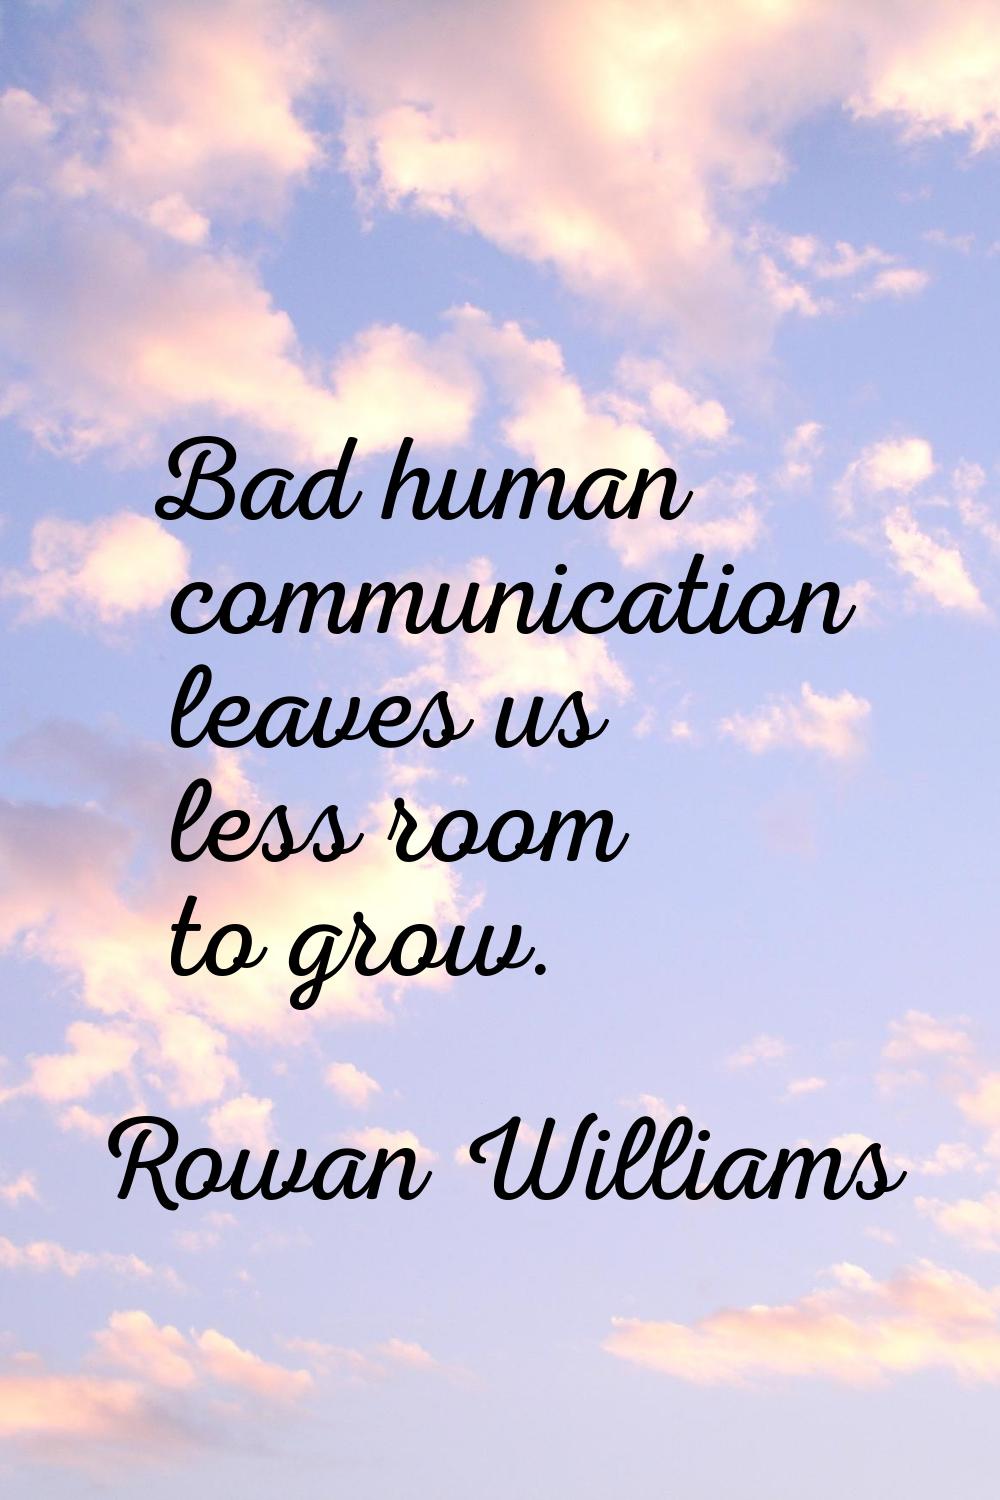 Bad human communication leaves us less room to grow.